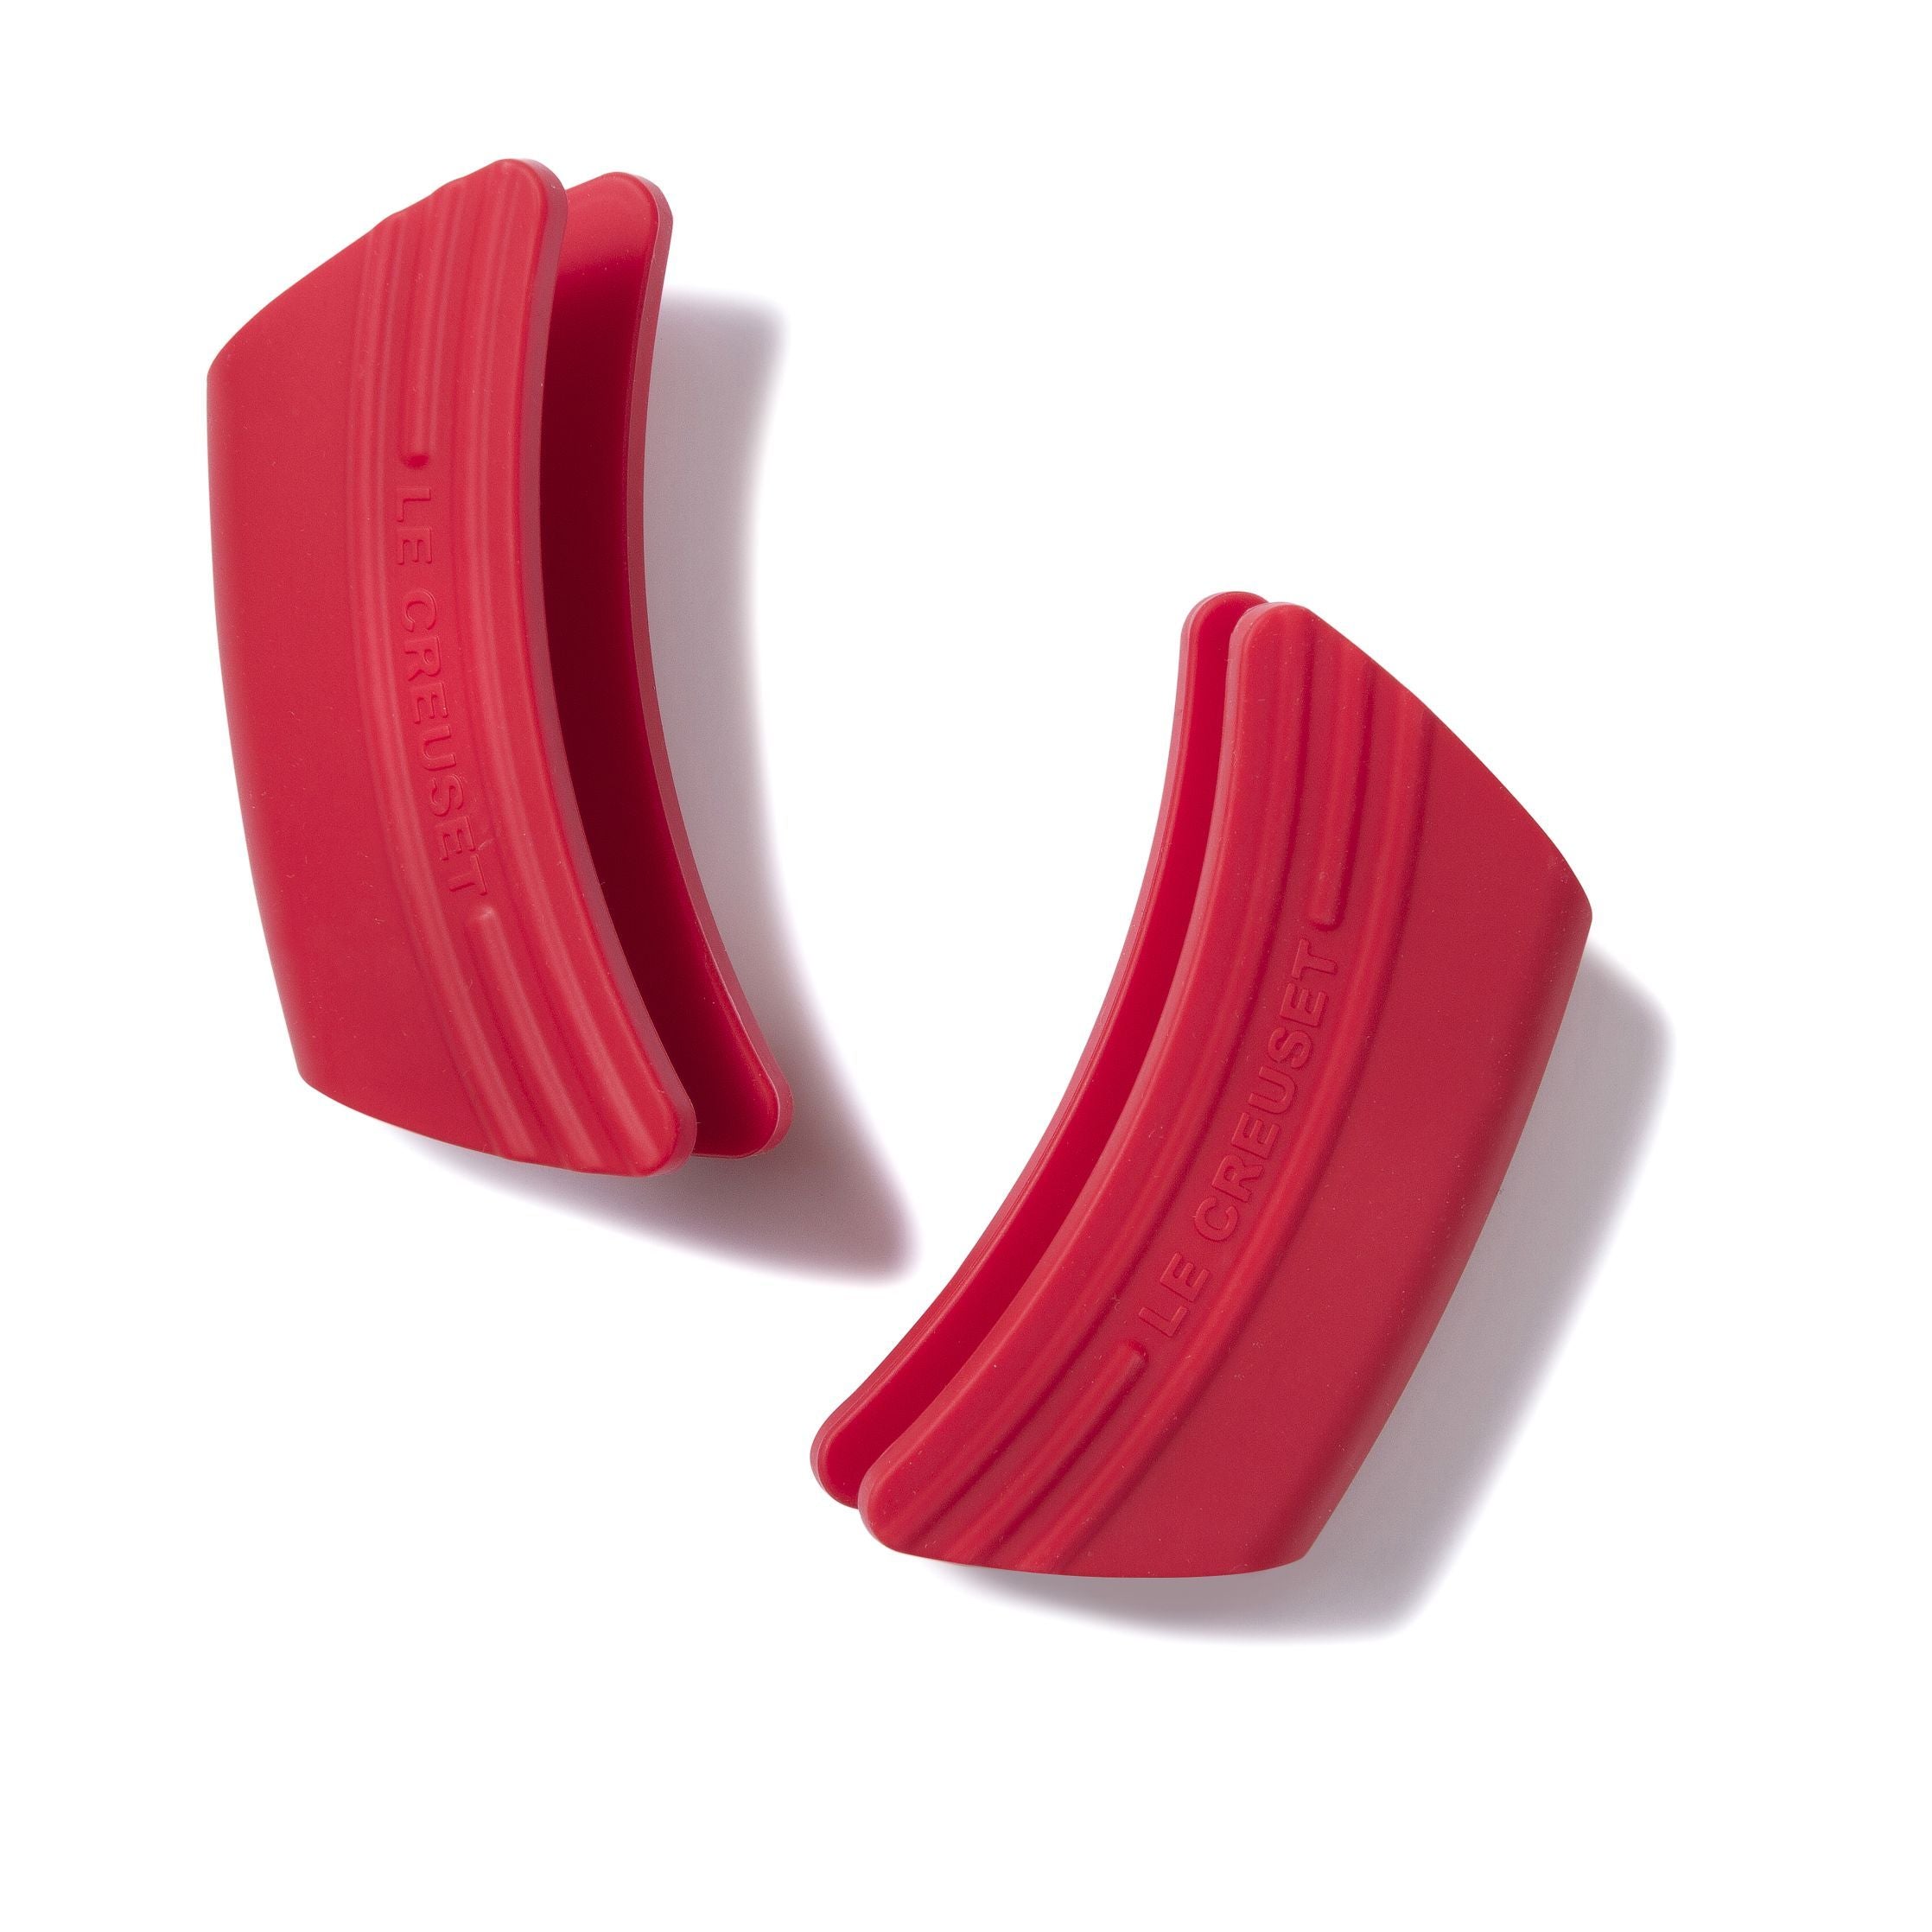 Le Creuset Silicone Handle Guard 2 Pcs., Cherry Red